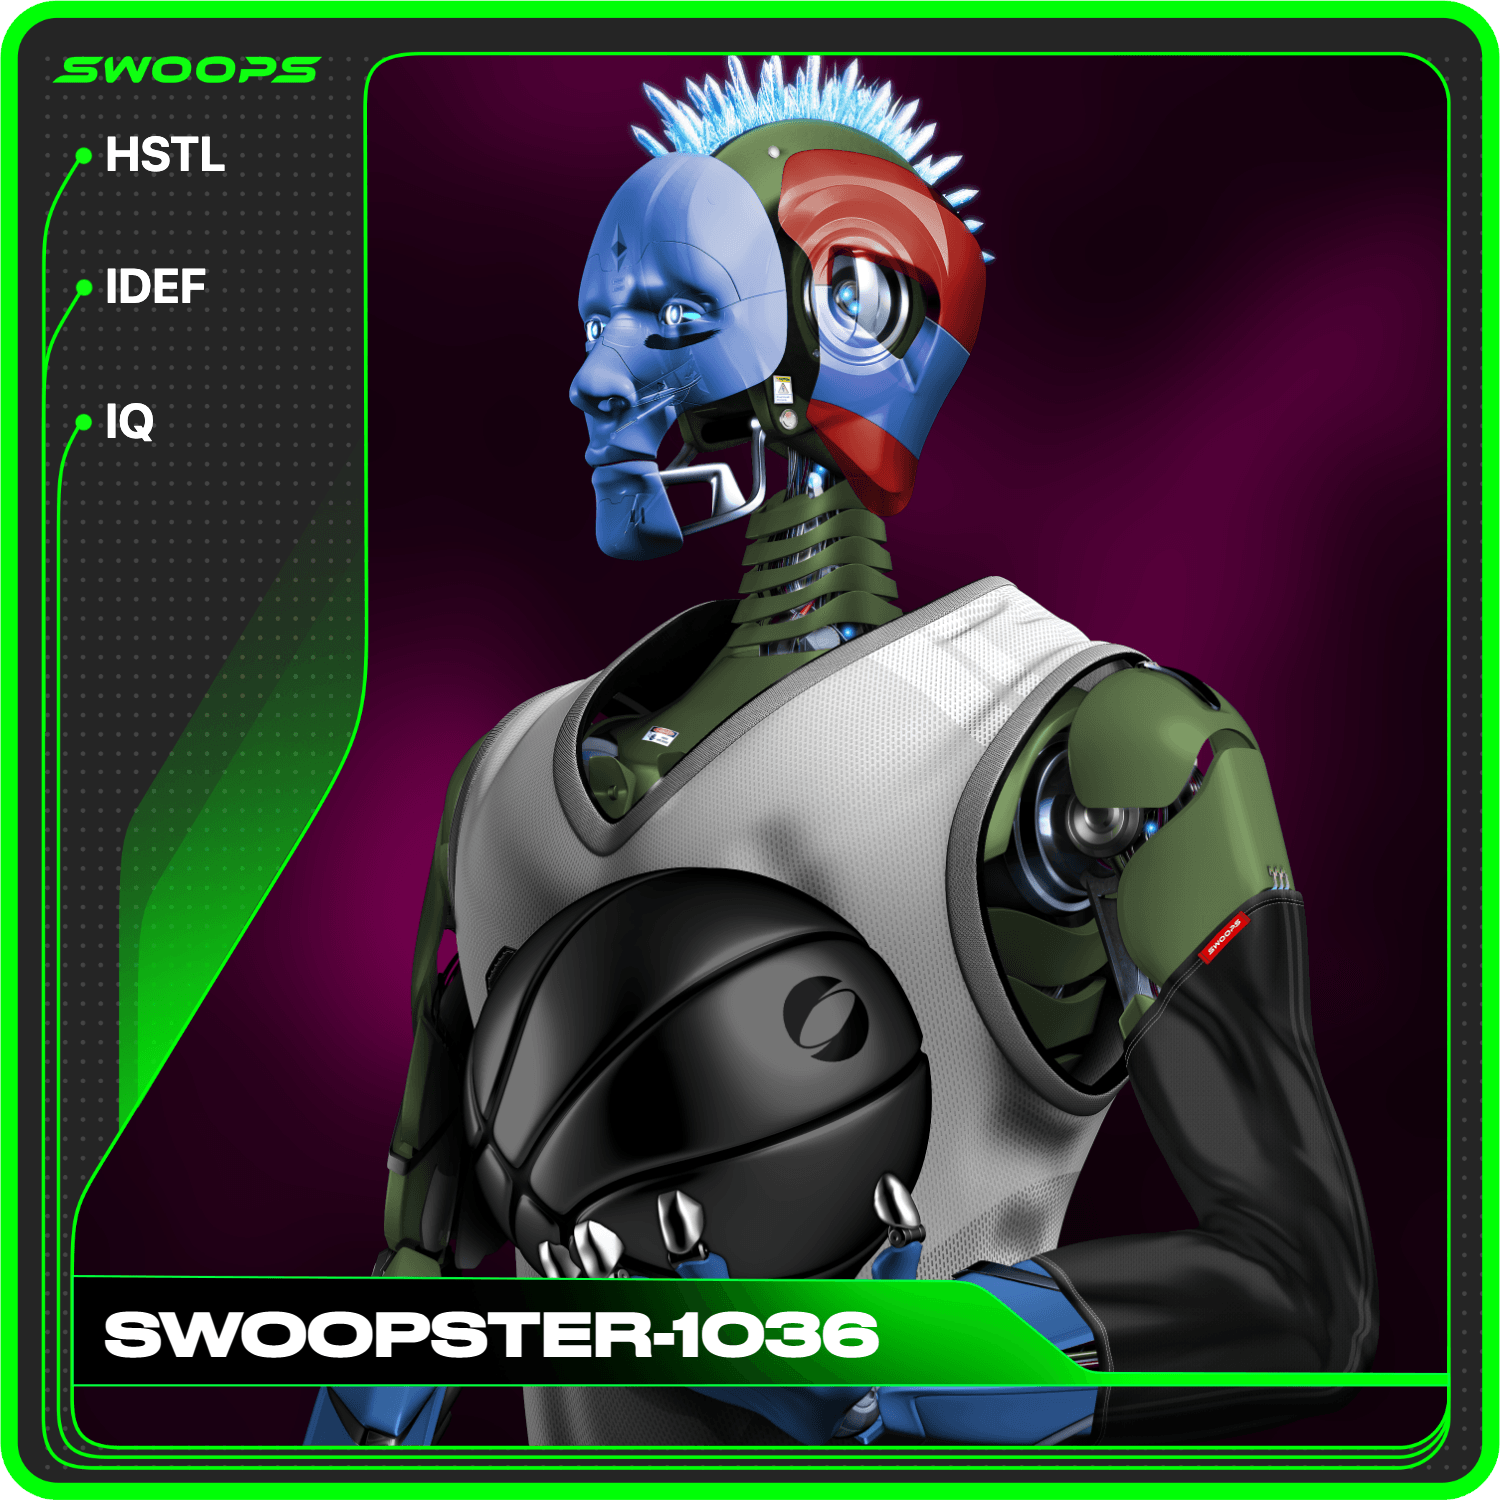 SWOOPSTER-1036